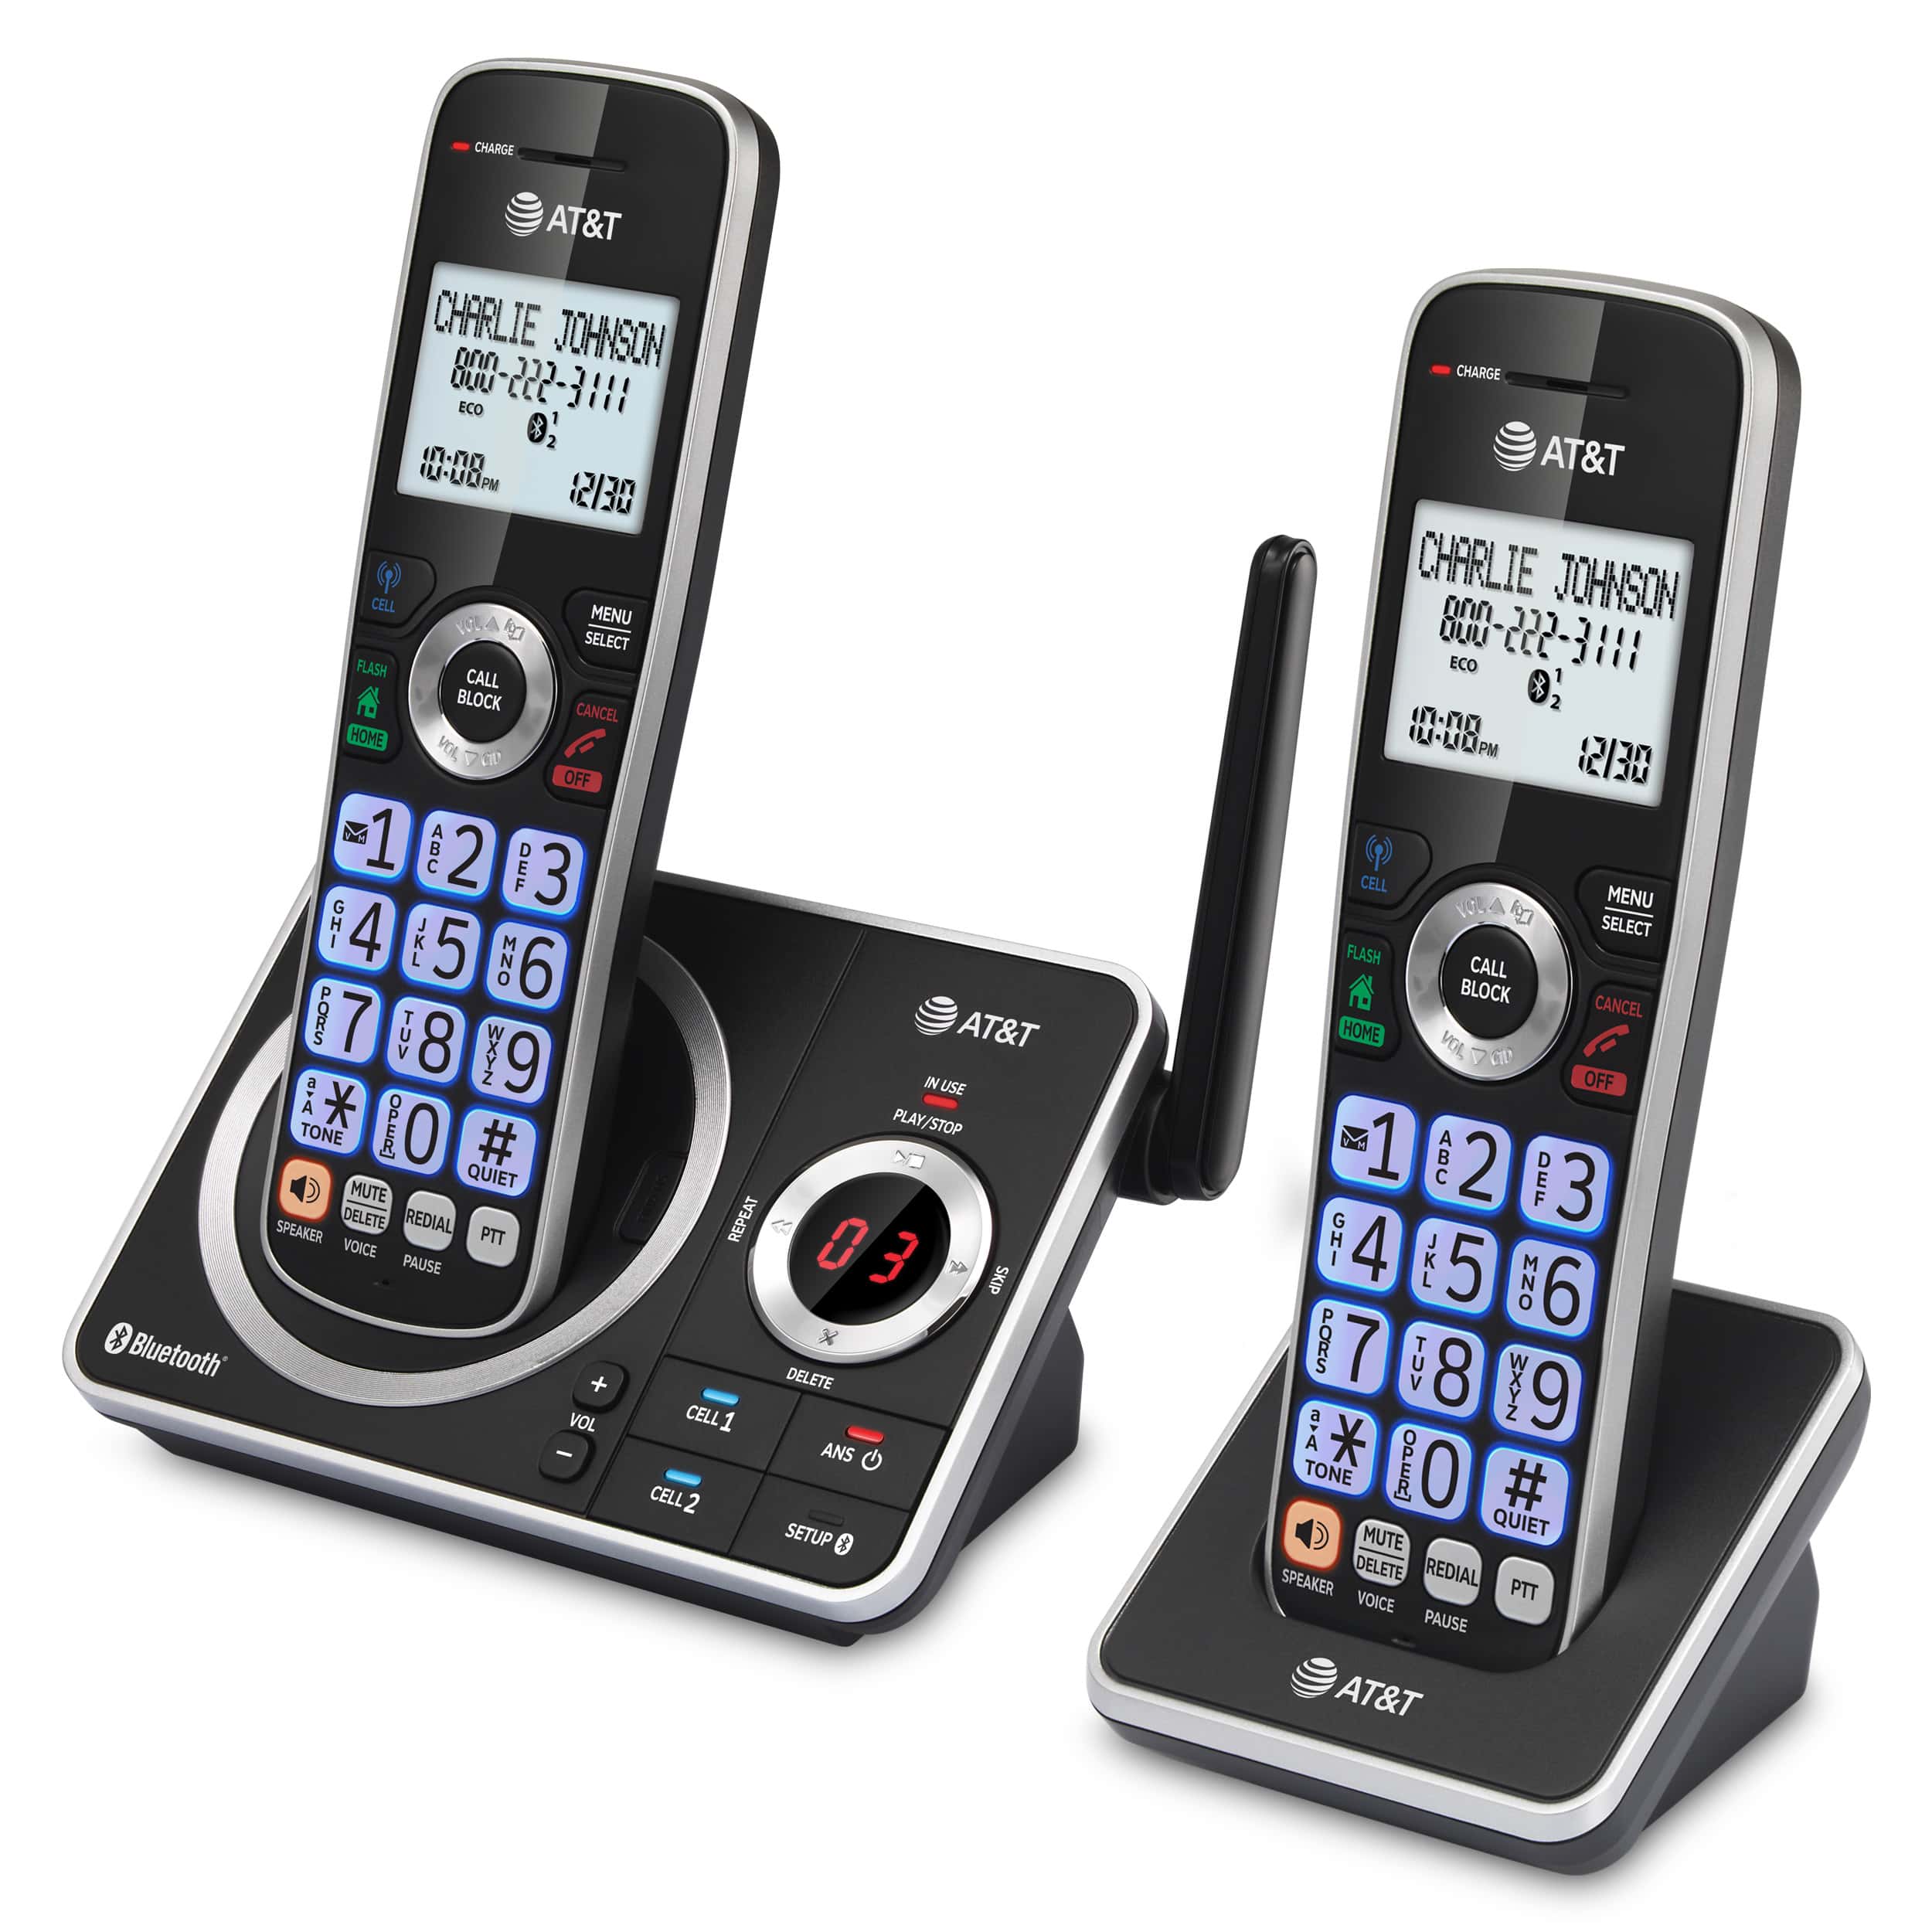 2 Handset Answering System with Connect to Cell™ - view 3